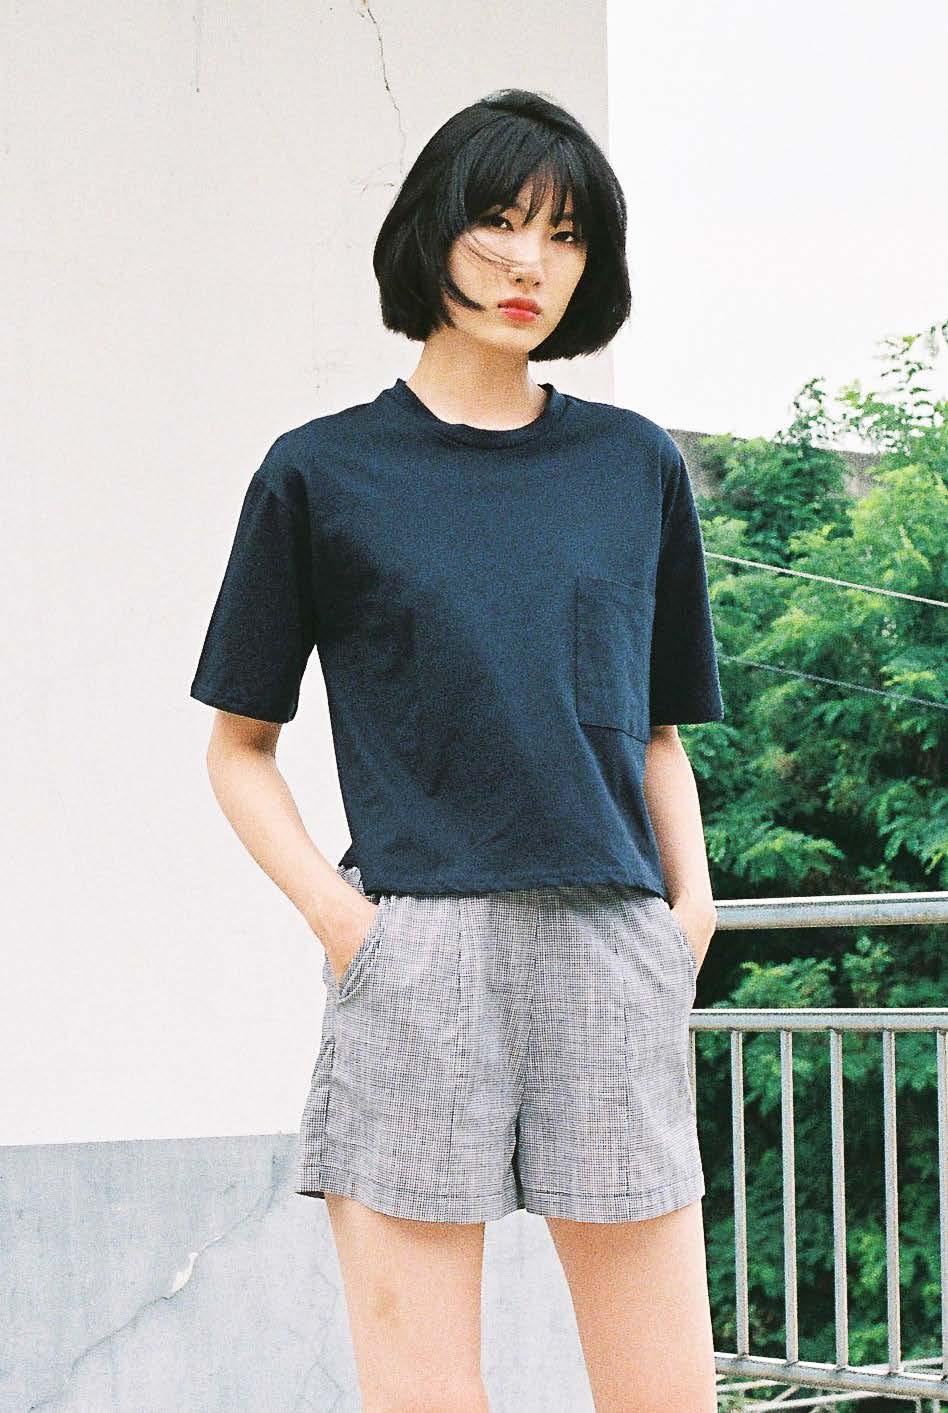 Day cropped t-shirt Slightly cropped t-shirt with boxy silhouette, in crisp, textured cotton. The chest pocket adds a cool, androgynous touch. Wholesale price: 17.